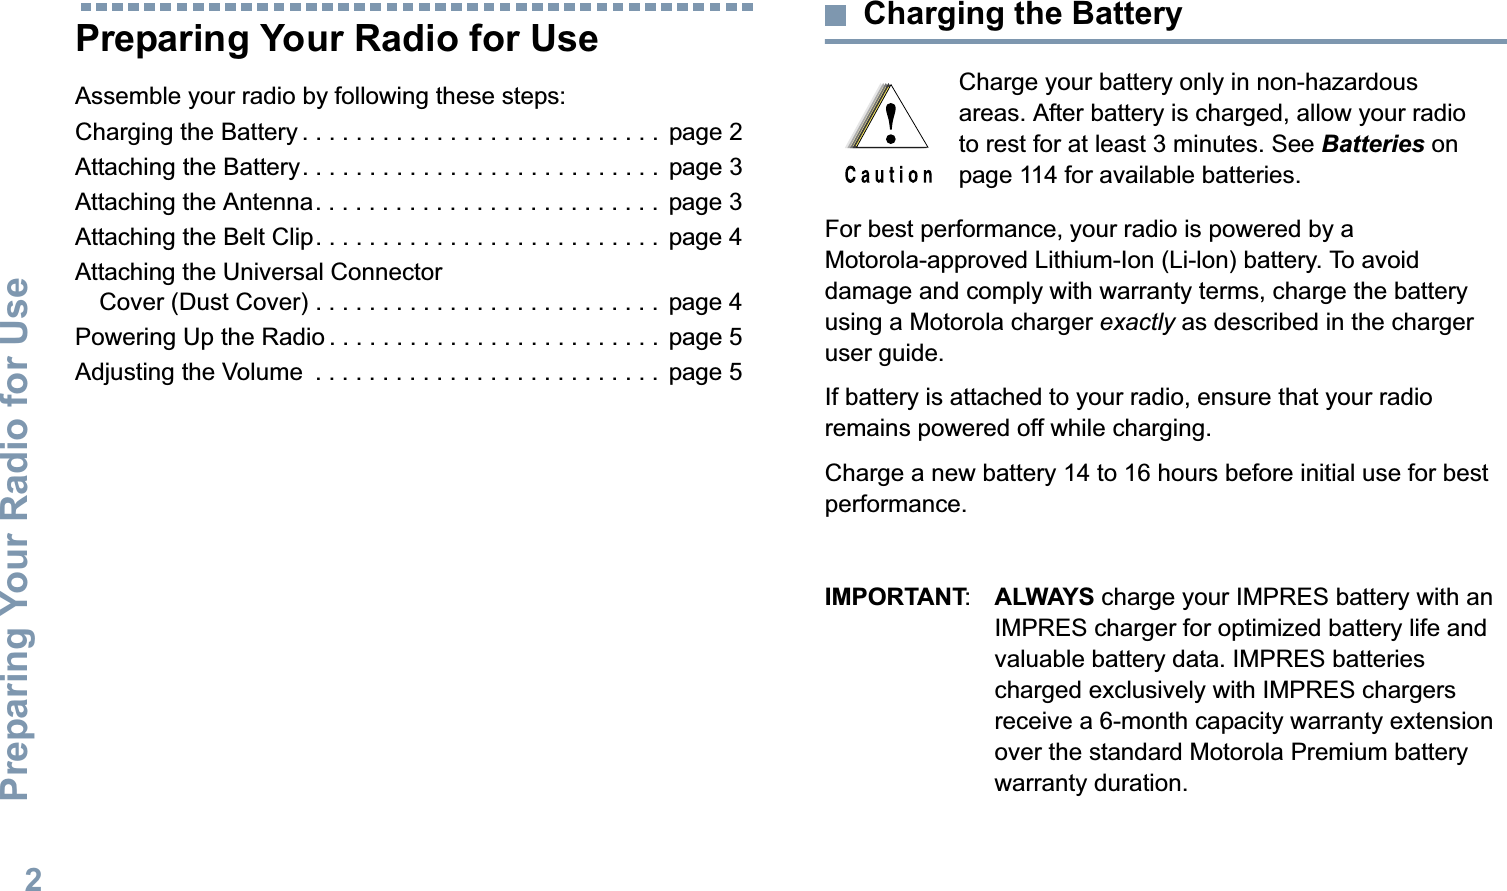 Preparing Your Radio for UseEnglish2Preparing Your Radio for UseAssemble your radio by following these steps:Charging the Battery . . . . . . . . . . . . . . . . . . . . . . . . . . .  page 2Attaching the Battery. . . . . . . . . . . . . . . . . . . . . . . . . . .  page 3Attaching the Antenna. . . . . . . . . . . . . . . . . . . . . . . . . .  page 3Attaching the Belt Clip. . . . . . . . . . . . . . . . . . . . . . . . . .  page 4Attaching the Universal Connector Cover (Dust Cover) . . . . . . . . . . . . . . . . . . . . . . . . . .  page 4Powering Up the Radio . . . . . . . . . . . . . . . . . . . . . . . . .  page 5Adjusting the Volume  . . . . . . . . . . . . . . . . . . . . . . . . . .  page 5Charging the BatteryFor best performance, your radio is powered by a Motorola-approved Lithium-Ion (Li-lon) battery. To avoid damage and comply with warranty terms, charge the battery using a Motorola charger exactly as described in the charger user guide. If battery is attached to your radio, ensure that your radio remains powered off while charging.Charge a new battery 14 to 16 hours before initial use for best performance.IMPORTANT:ALWAYS charge your IMPRES battery with an IMPRES charger for optimized battery life and valuable battery data. IMPRES batteries charged exclusively with IMPRES chargers receive a 6-month capacity warranty extension over the standard Motorola Premium battery warranty duration.Charge your battery only in non-hazardous areas. After battery is charged, allow your radio to rest for at least 3 minutes. See Batteries on page 114 for available batteries. 